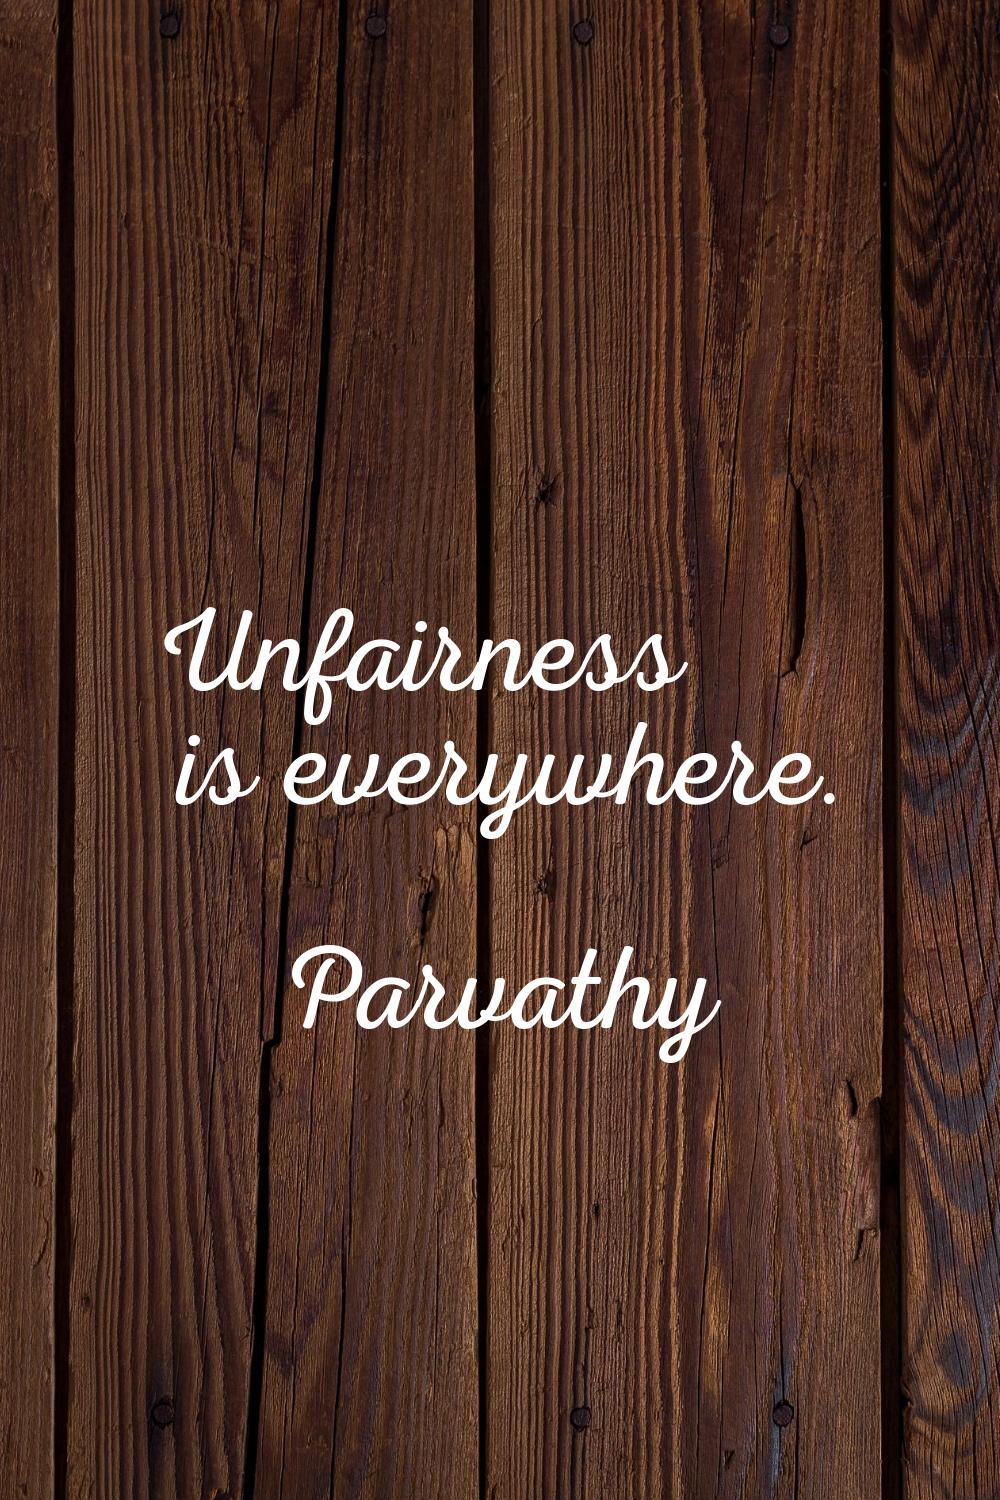 Unfairness is everywhere.